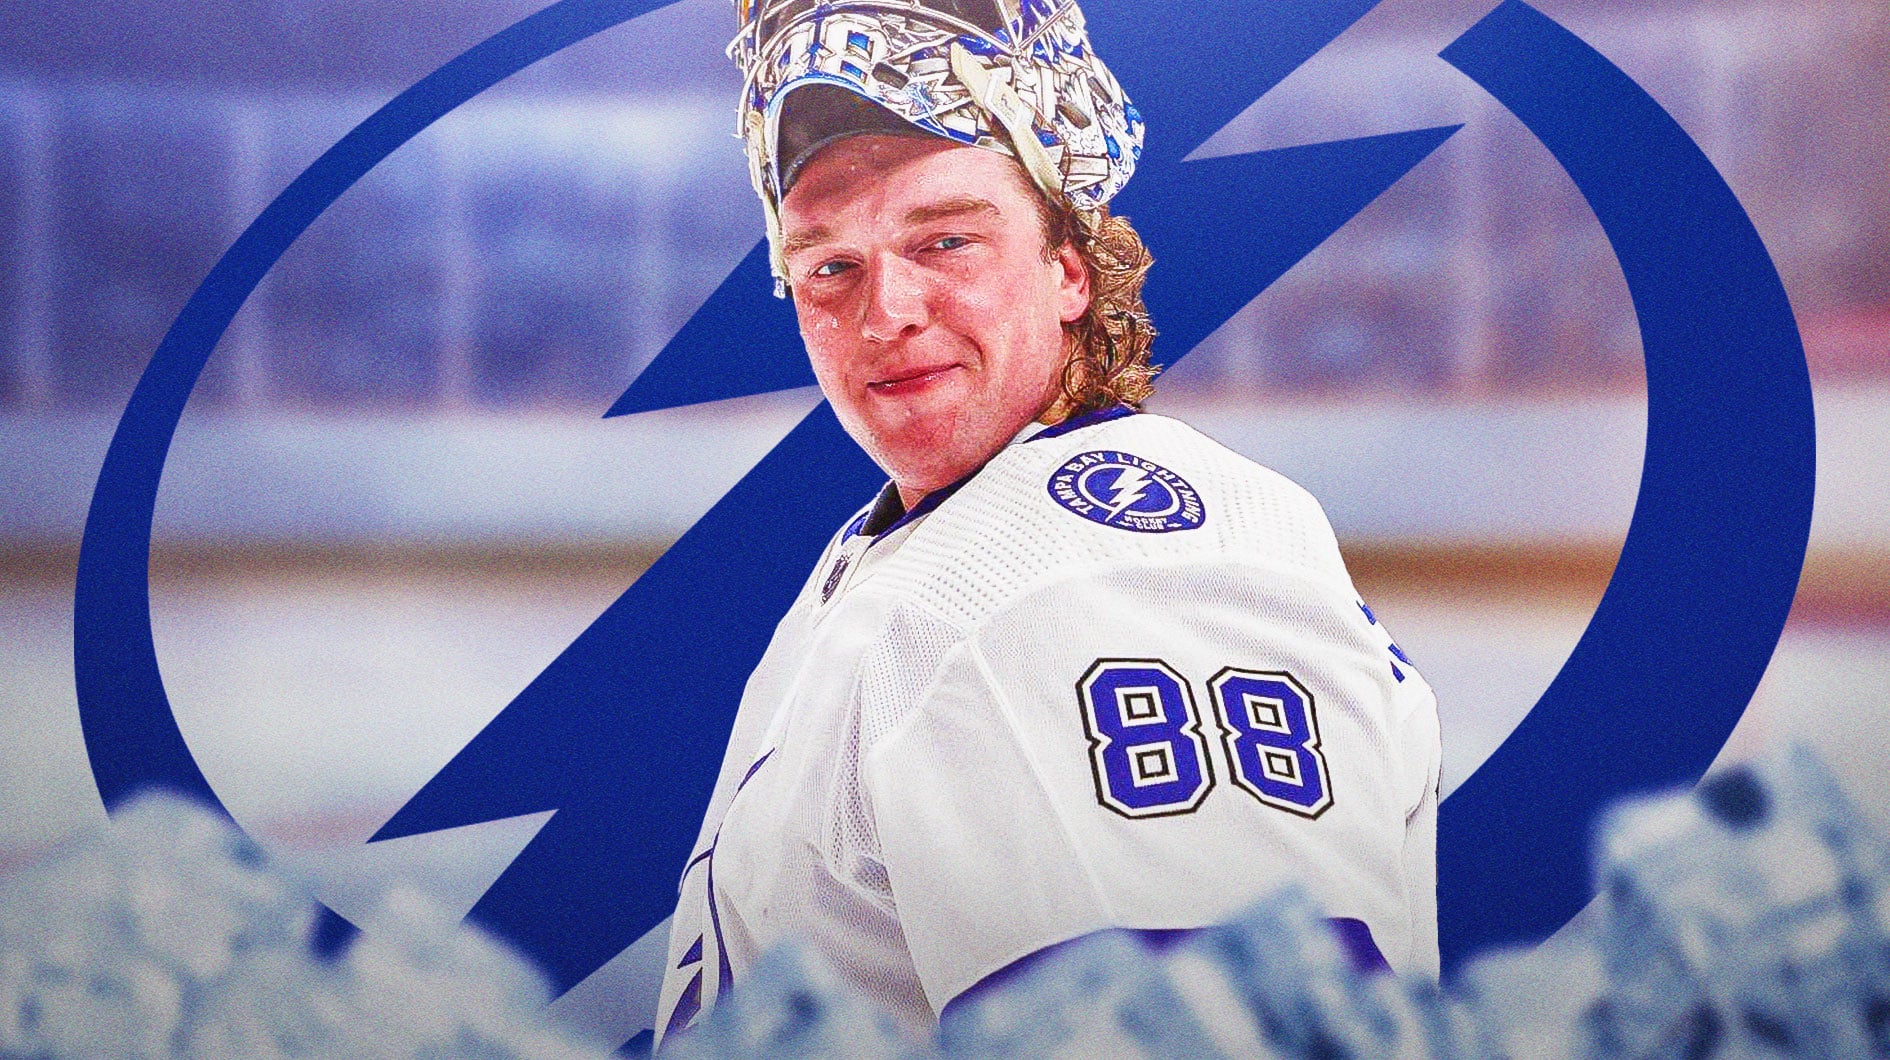 Andrei Vasilevskiy in middle of image looking happy with fire around him, TB Lightning logo, hockey rink in background